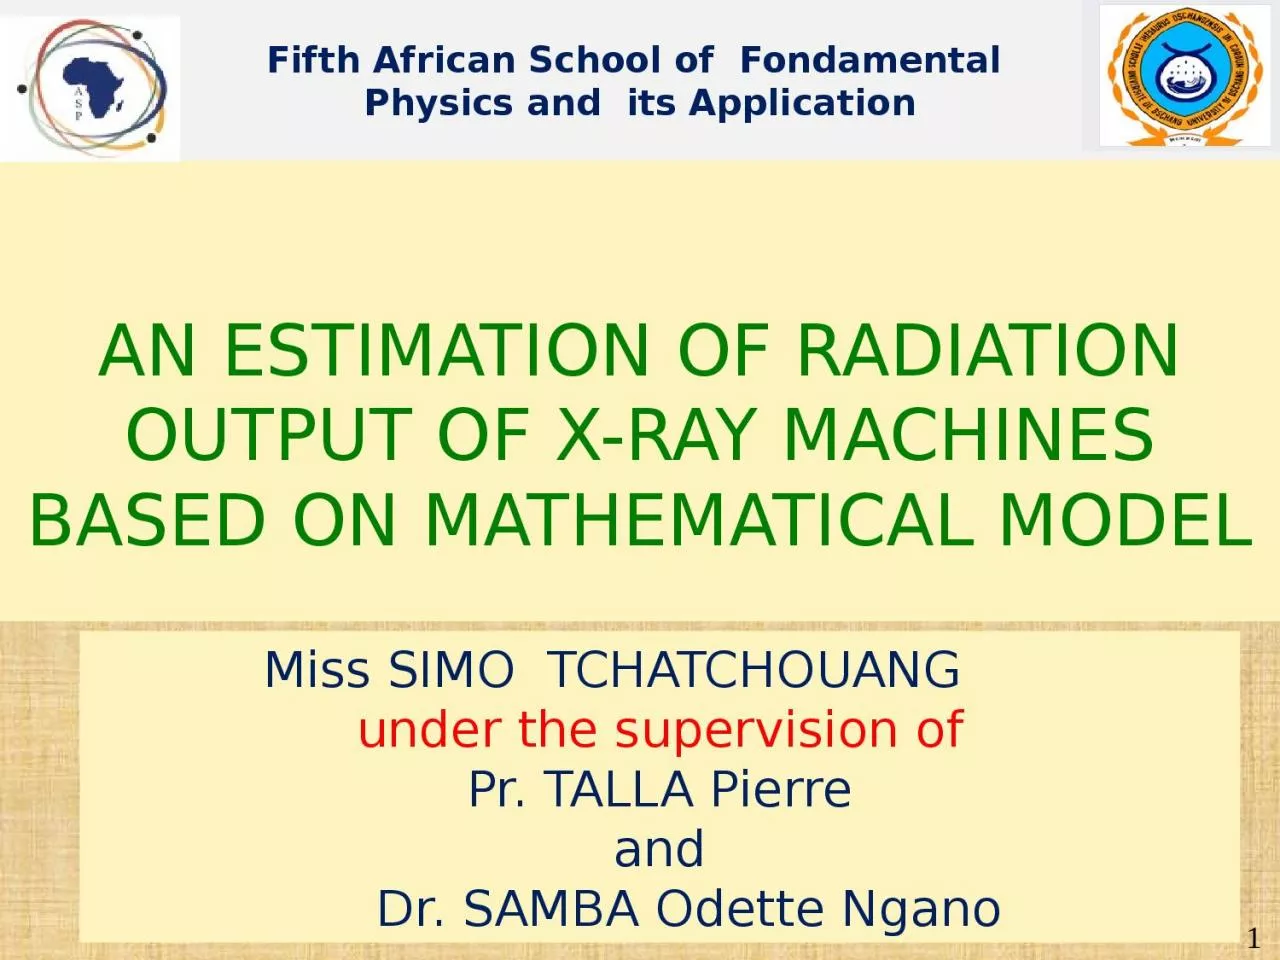 AN ESTIMATION OF RADIATION OUTPUT OF X-RAY MACHINES BASED ON MATHEMATICAL MODEL